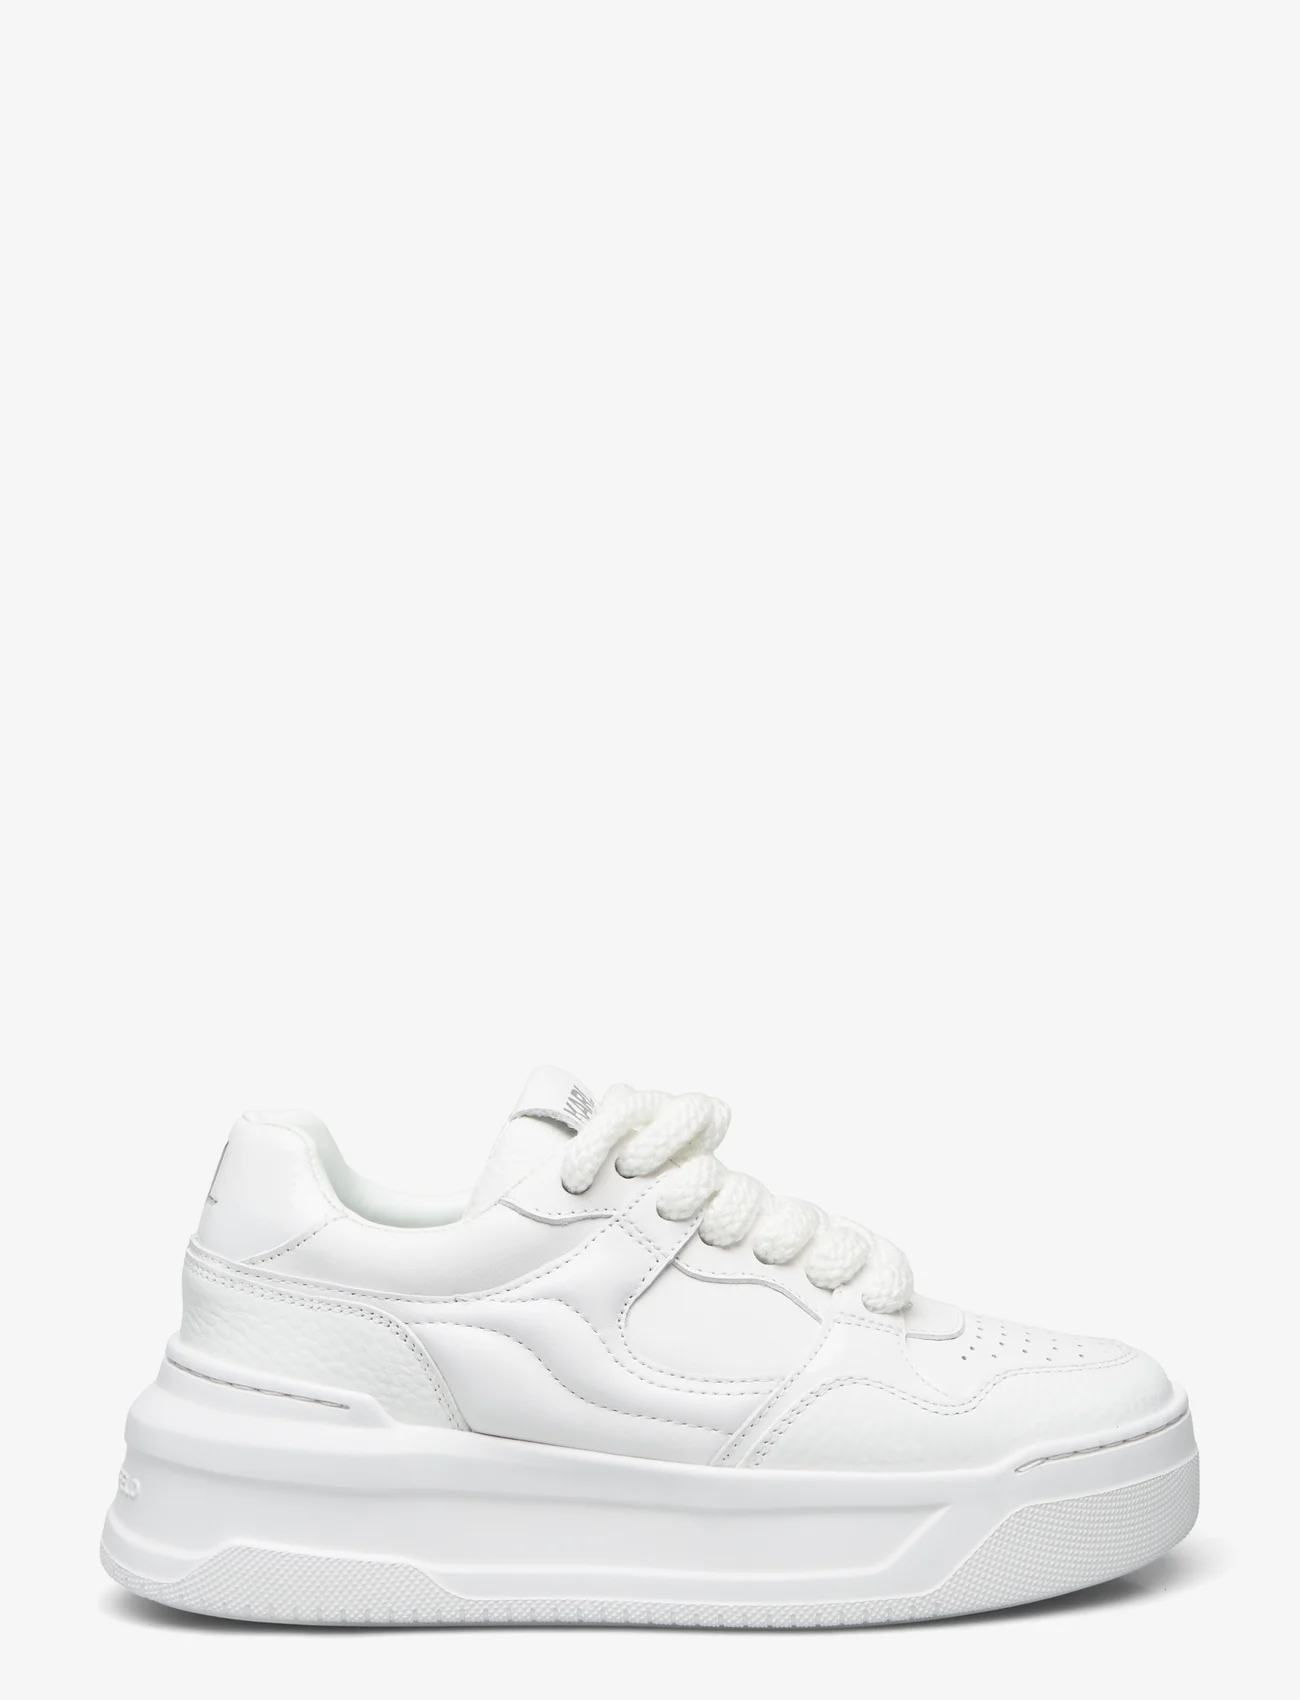 Karl Lagerfeld Shoes - KREW MAX KC - low top sneakers - white lthr - 1